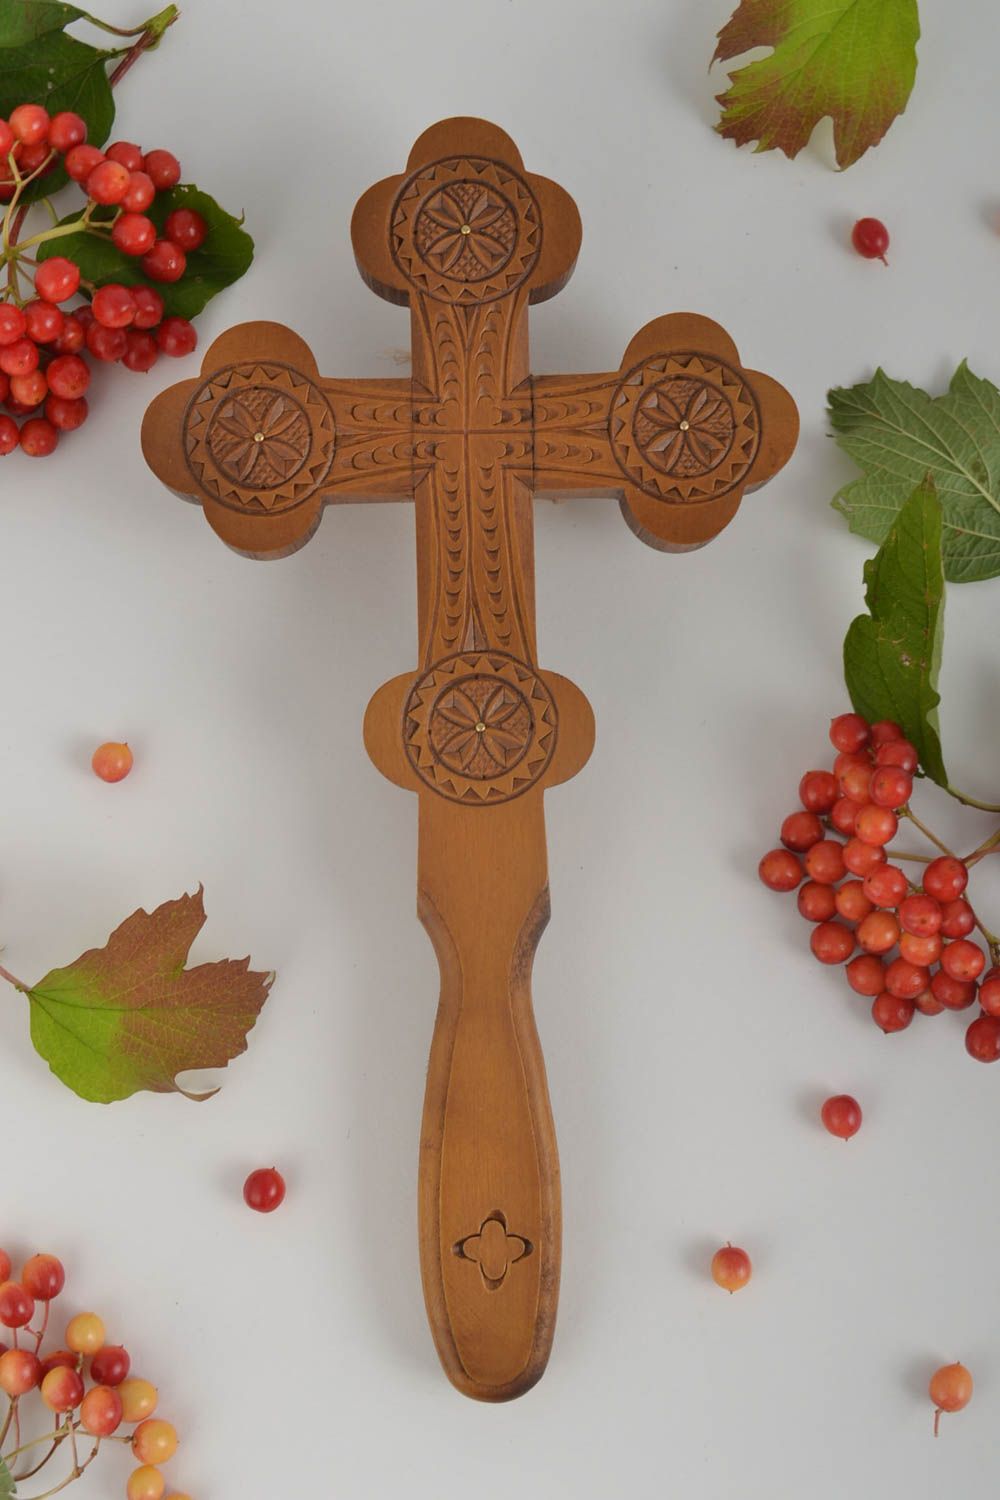 Wooden cross handmade wood carvings wall decorations religious gifts home decor photo 1